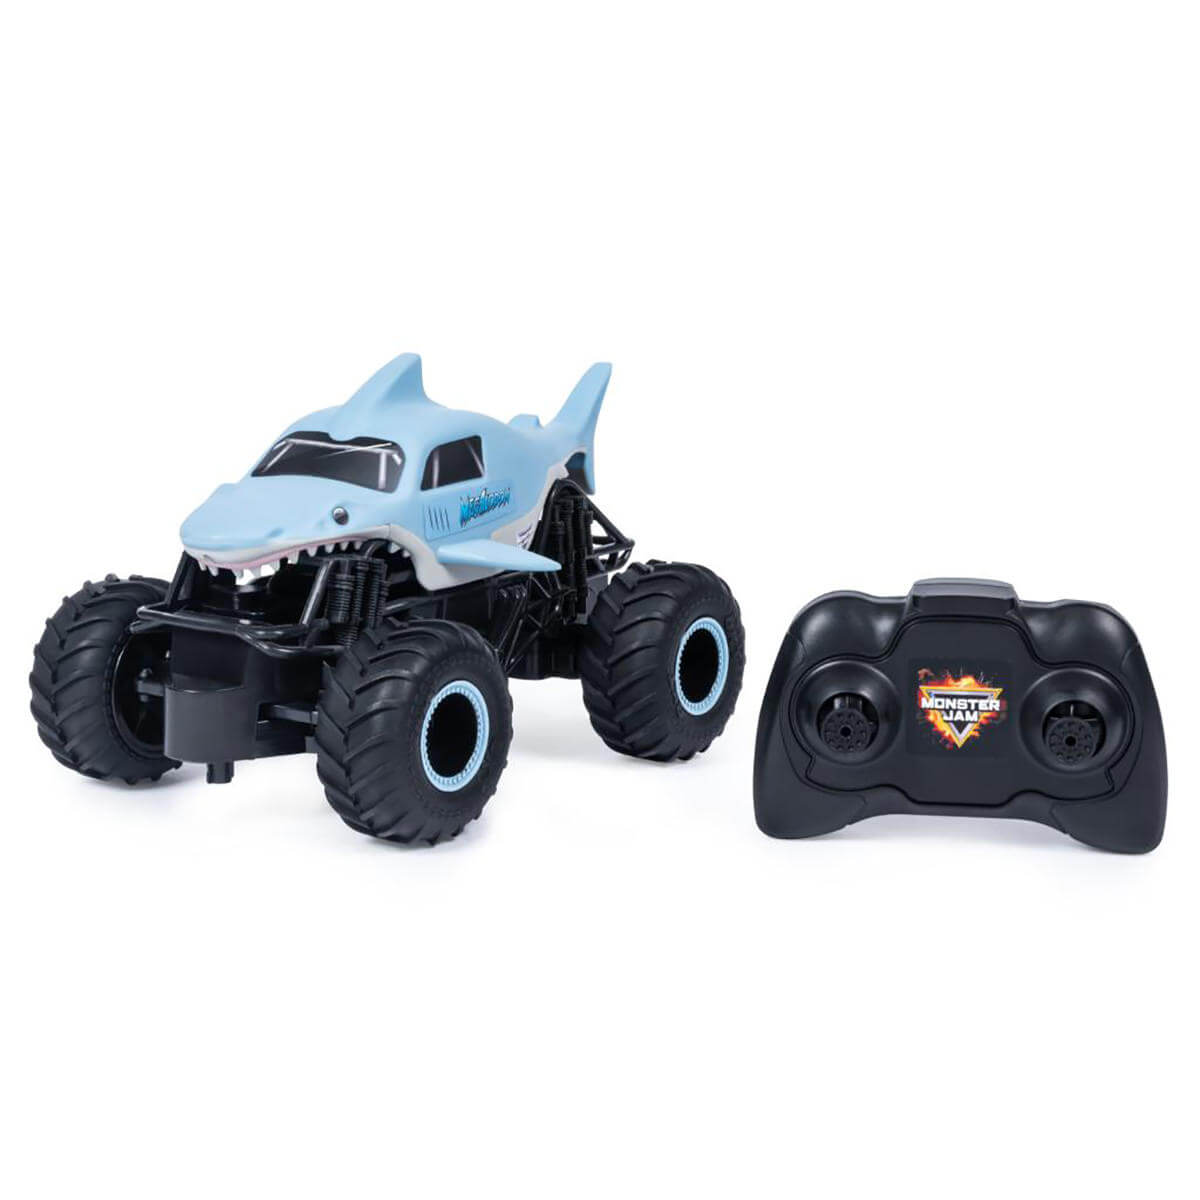 Monster Jam Full Function Remote Control Megalodon 1:24 Scale RC Vehicle